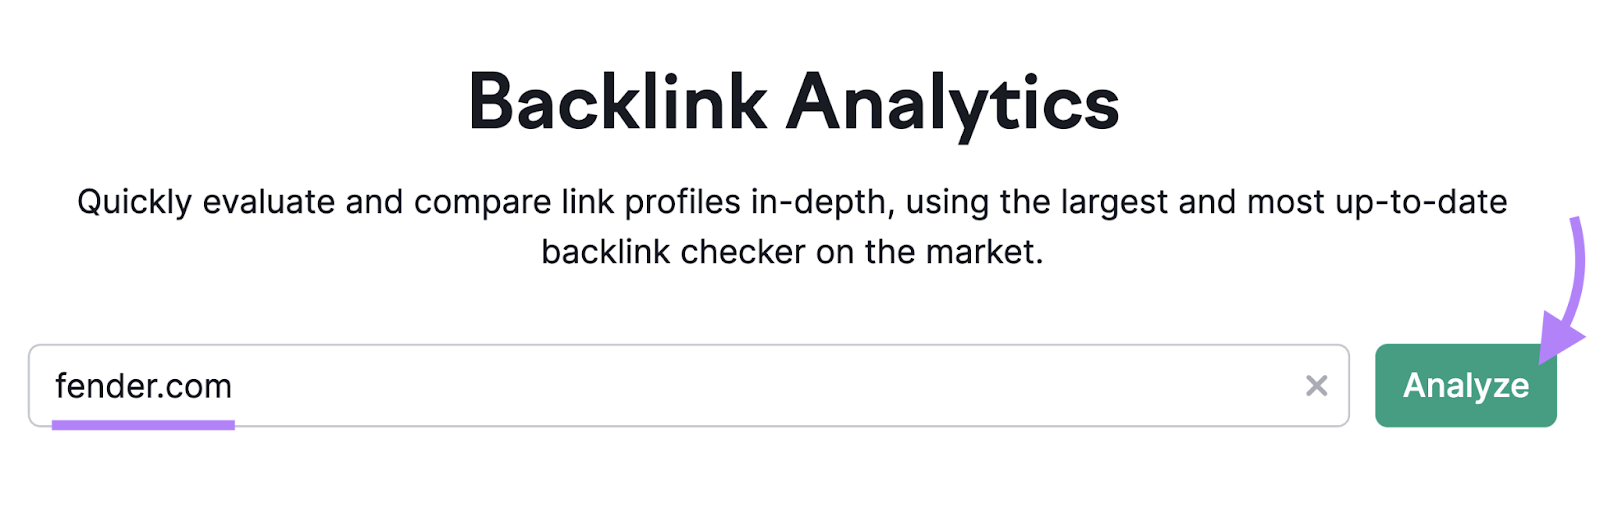 "fender.com" entered into the Backlink Analytics tool search bar